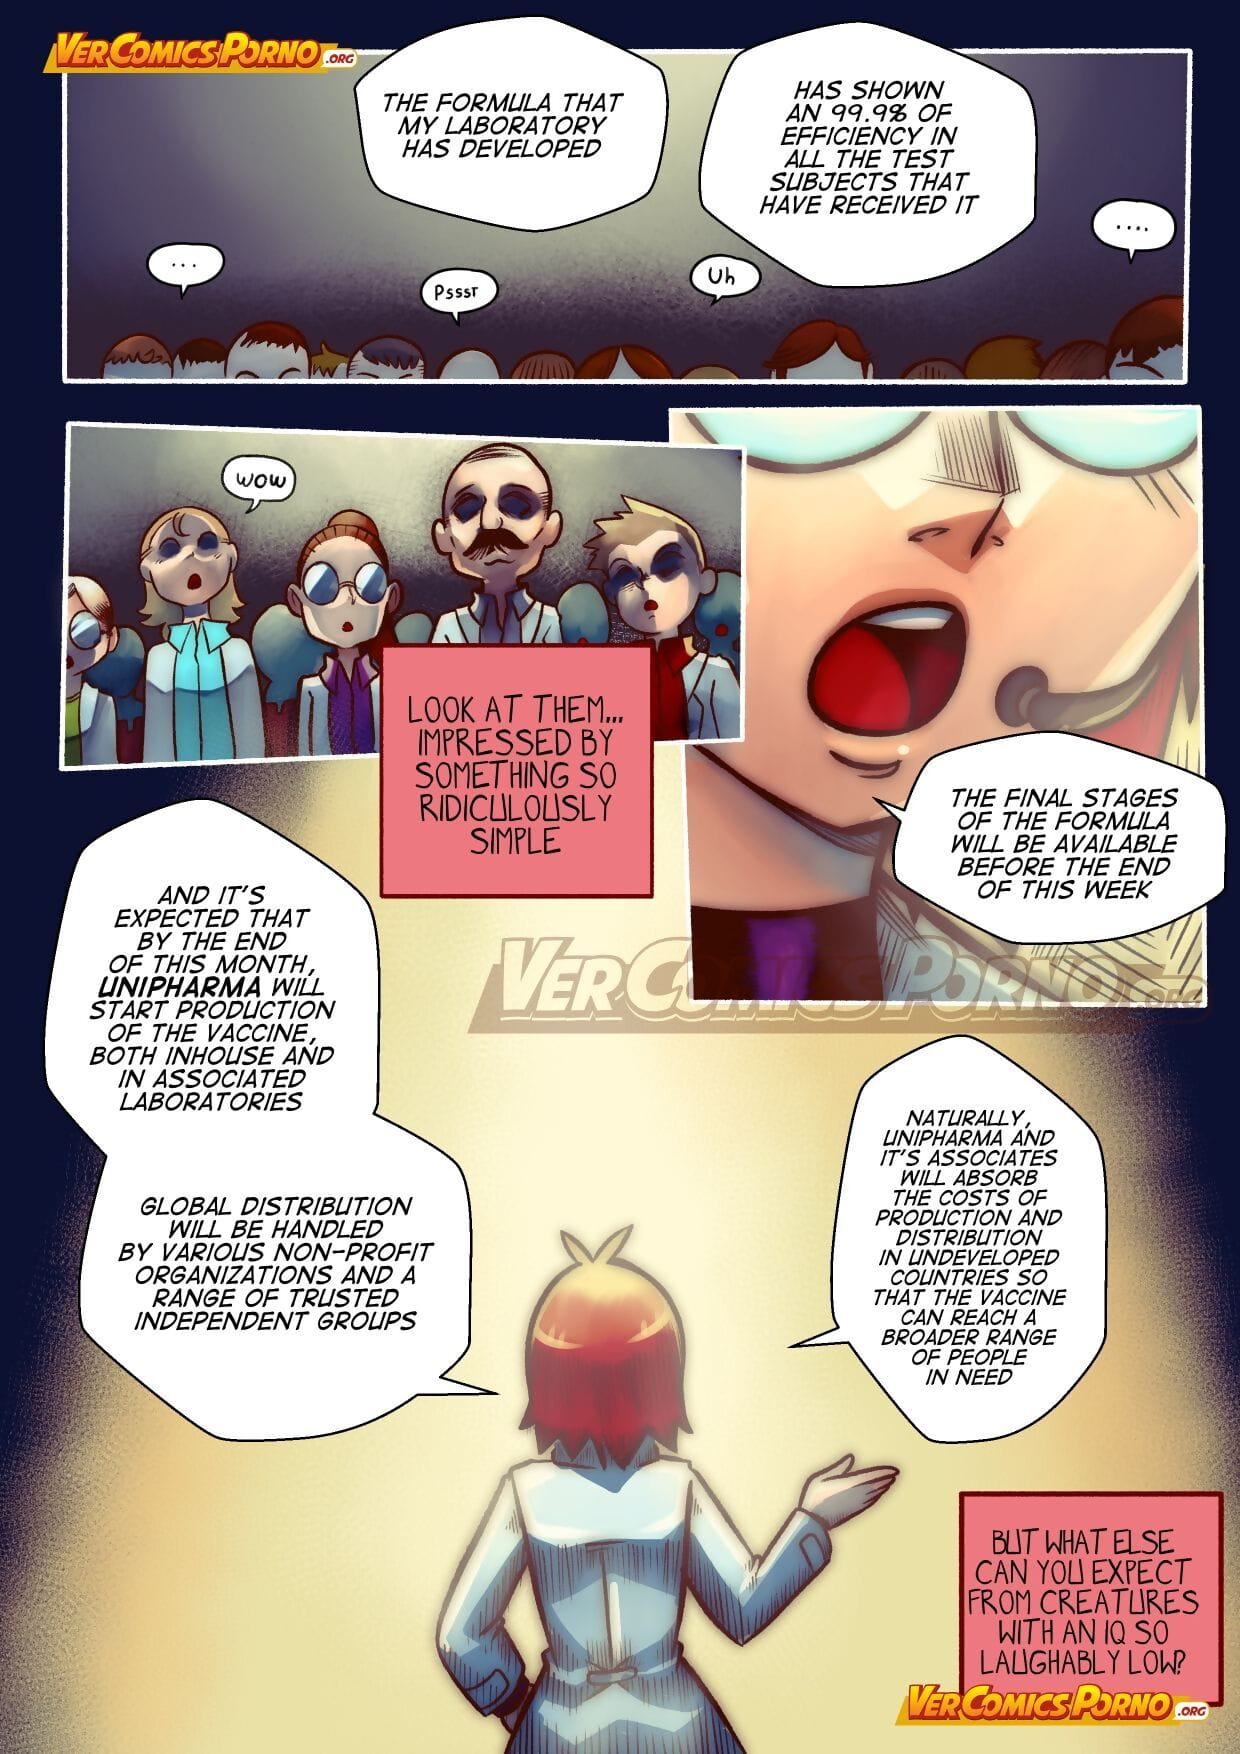 Cherry Road Part 4 page 1